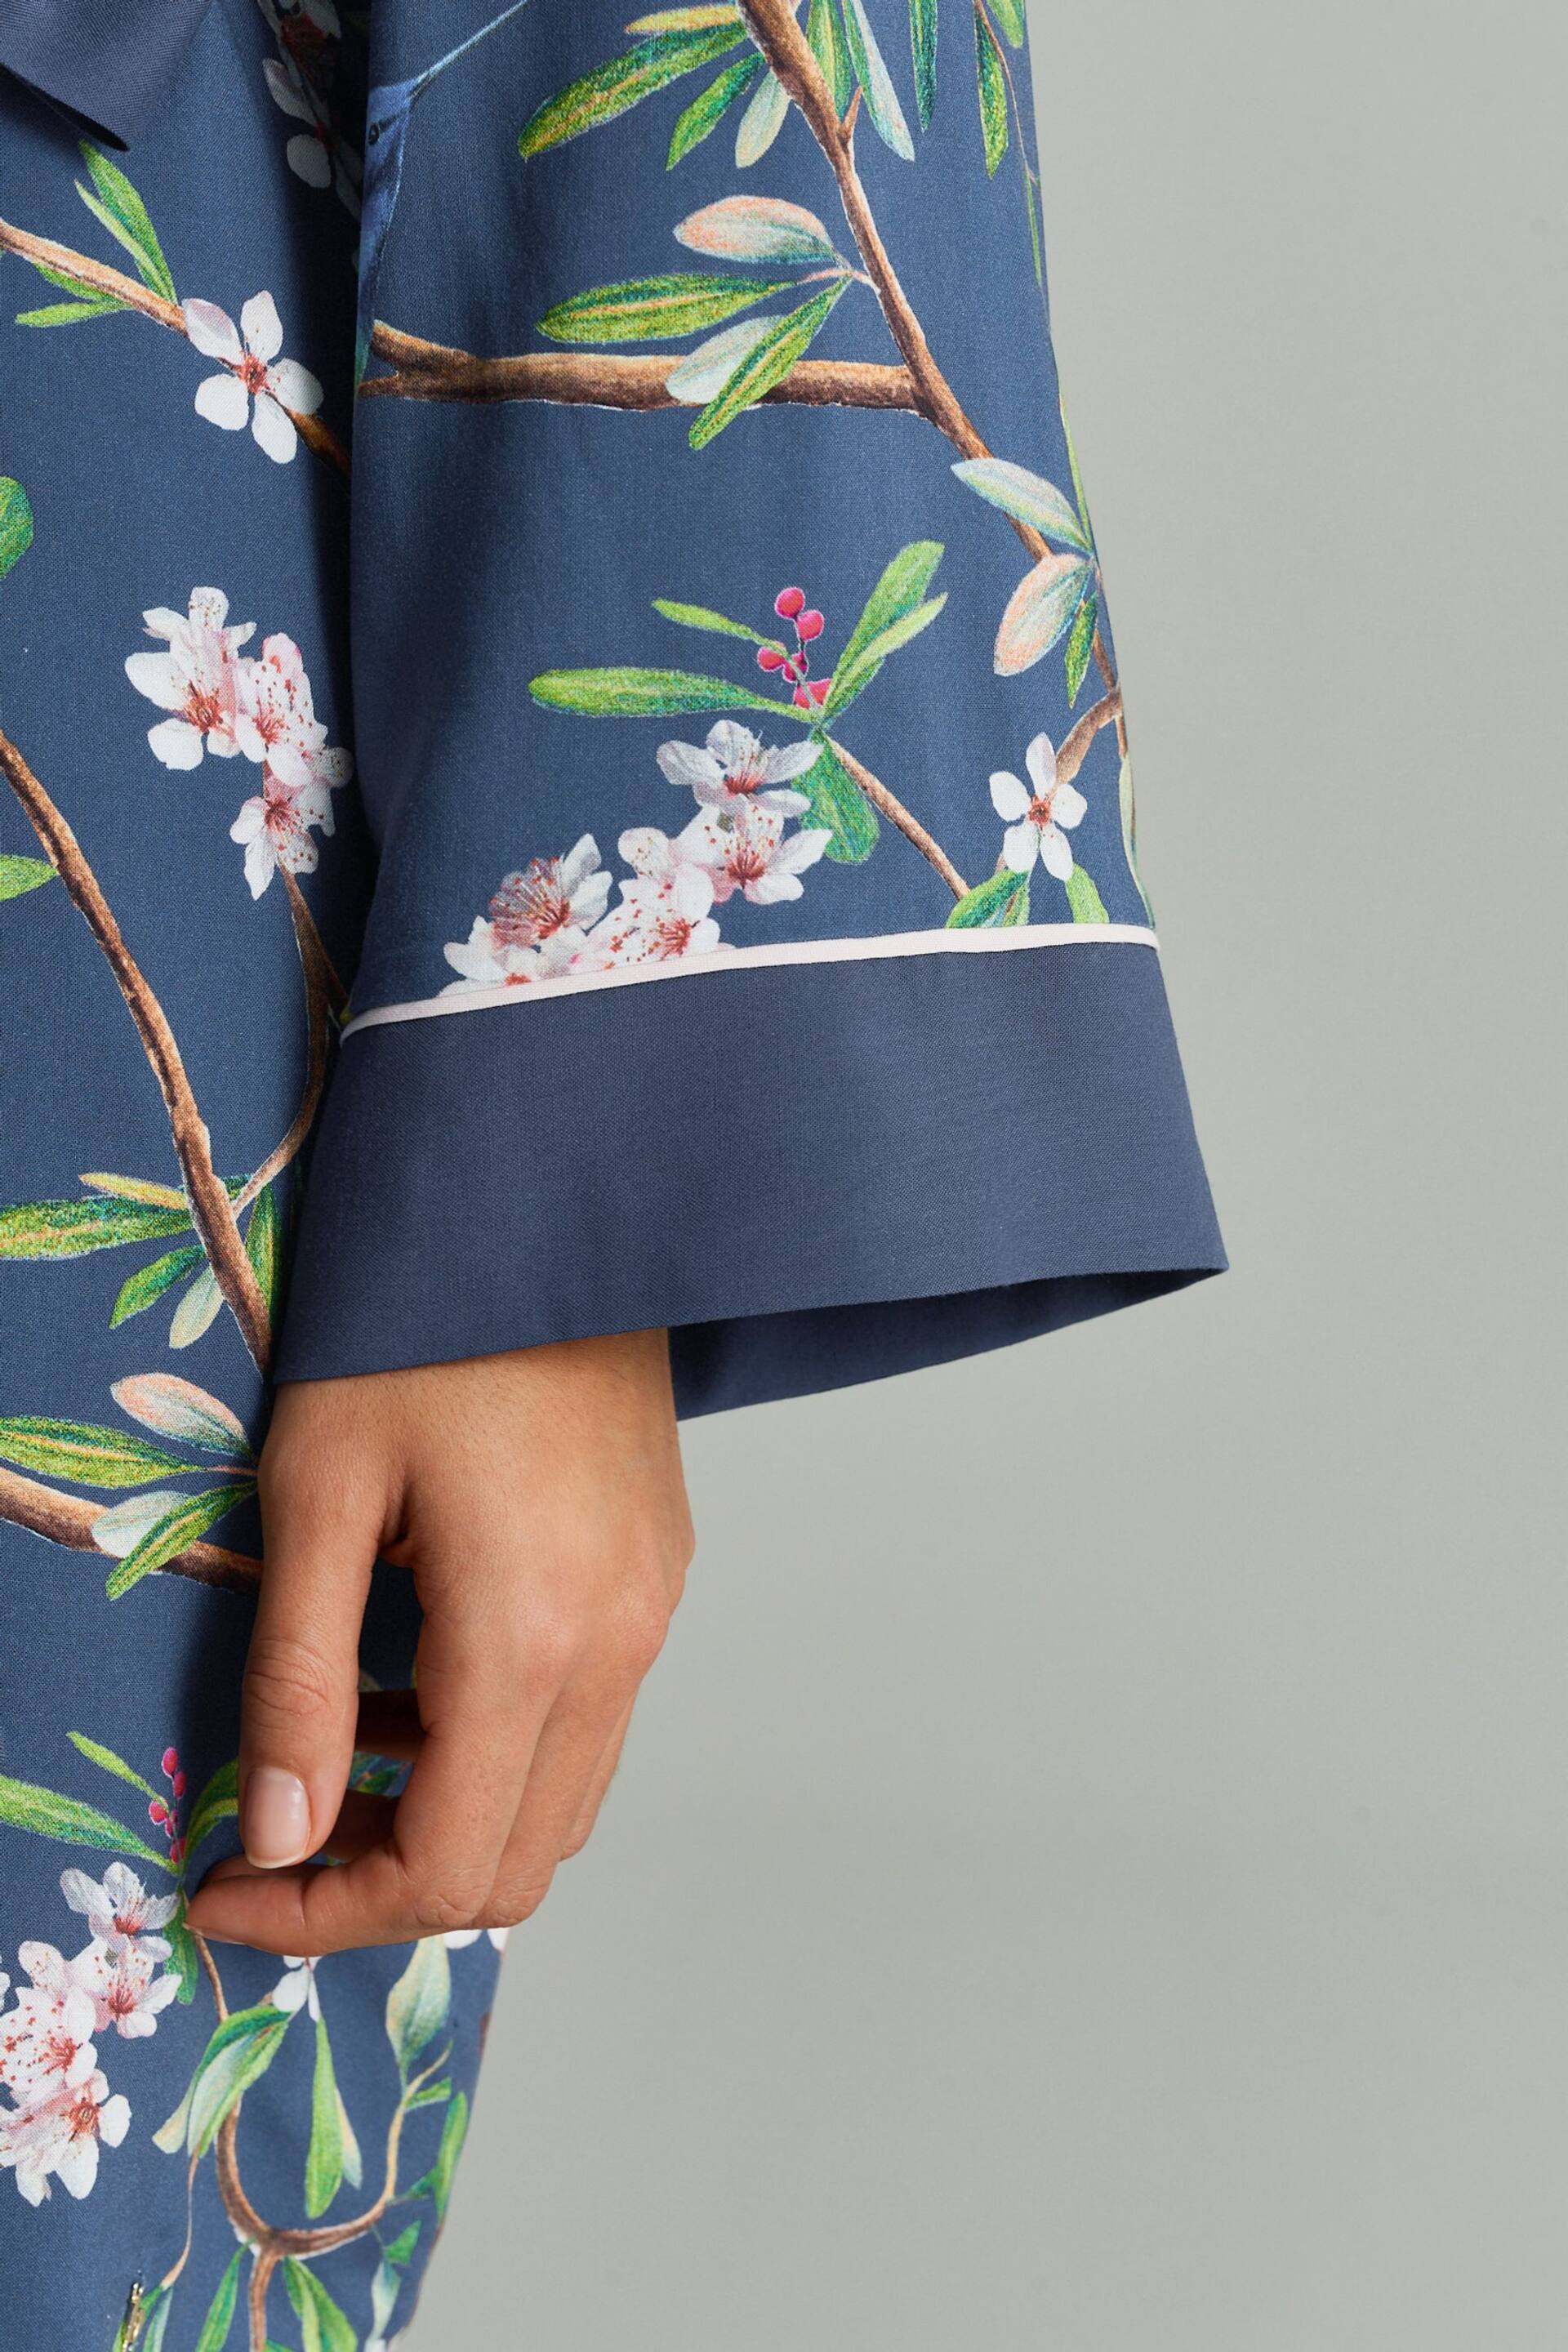 B by Ted Baker Charcoal Navy Bird Viscose Robe - Image 9 of 12